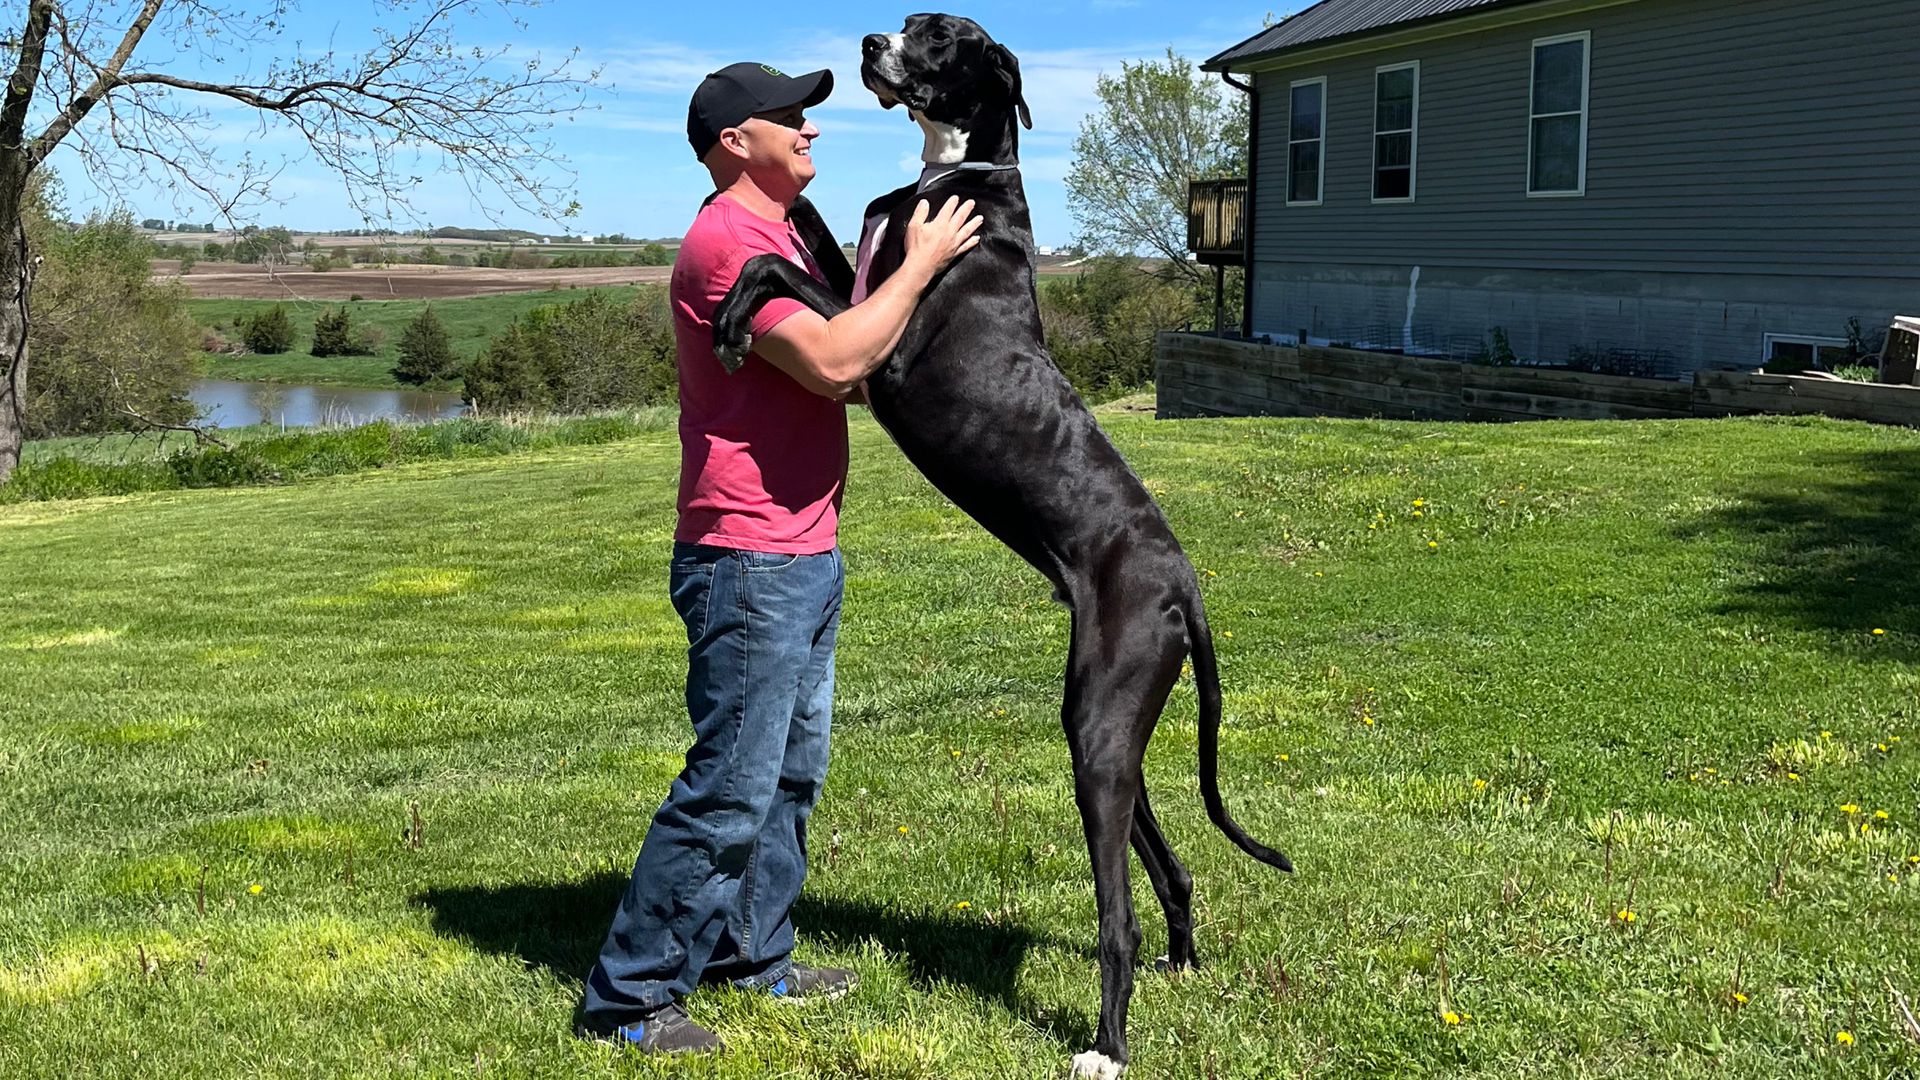 Great Dane named world's tallest dog - but he's still terrified of one thing